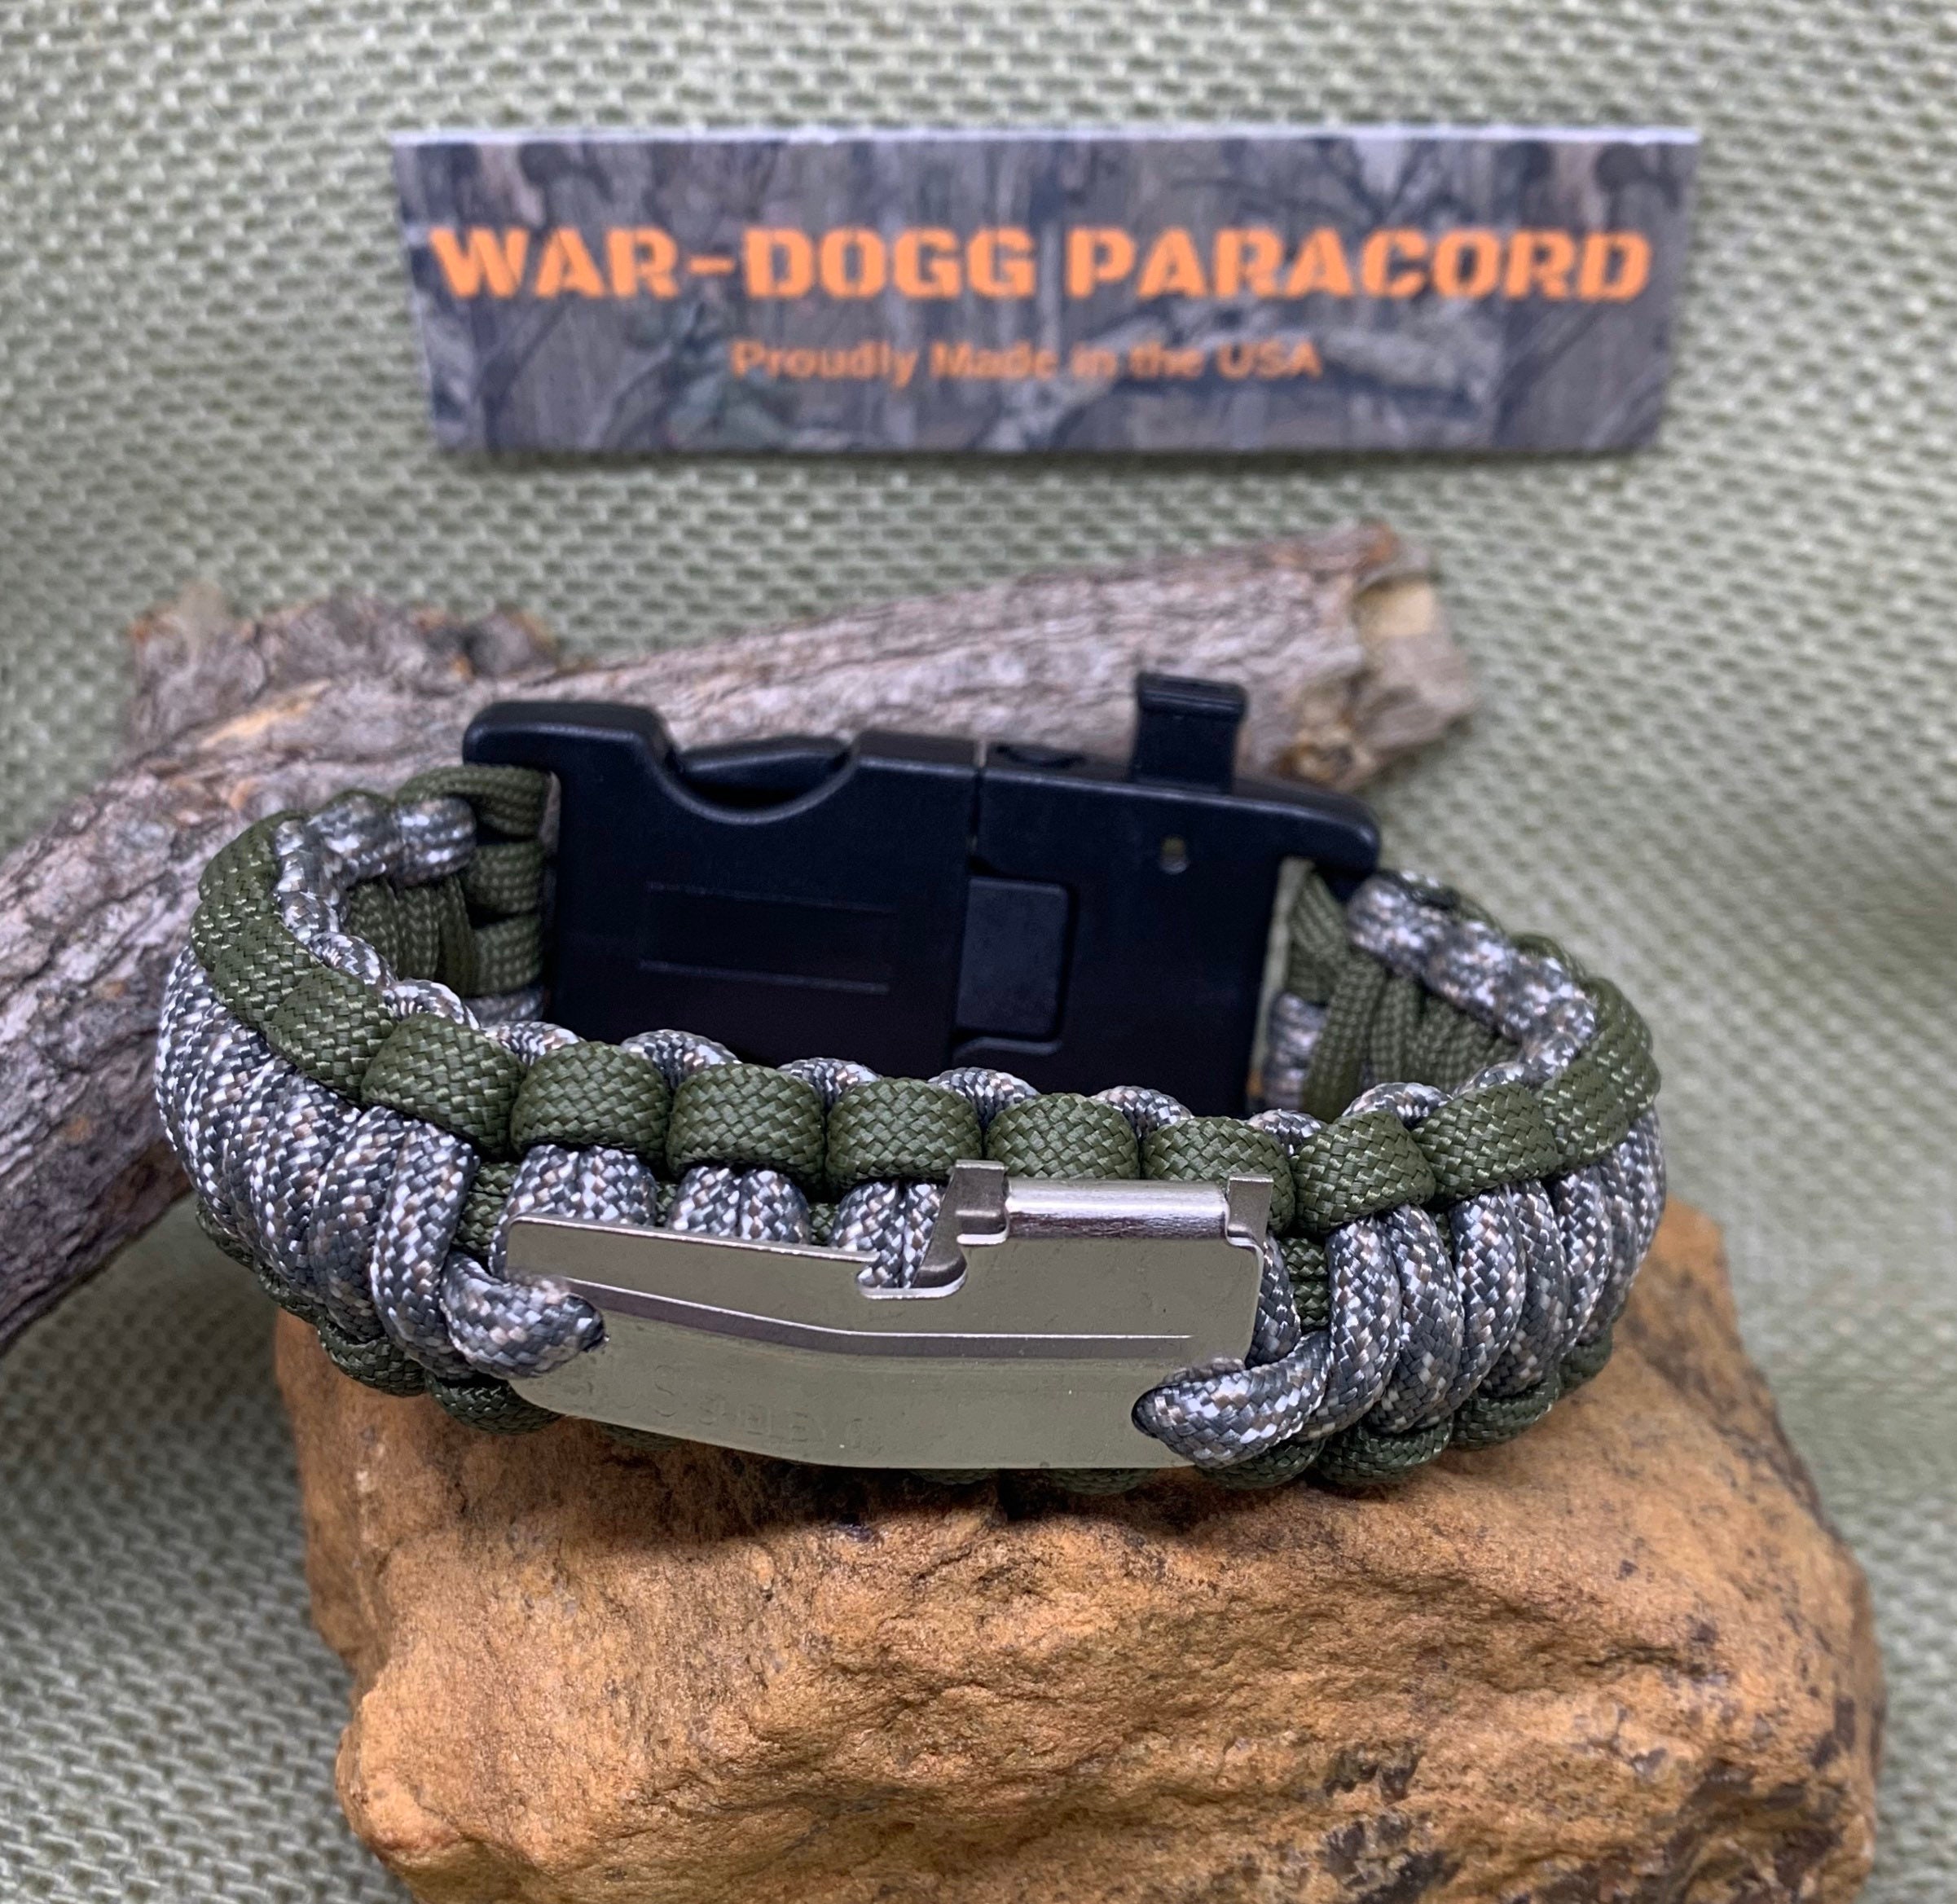 Paracord Survival Bracelet war-dogg Led W/ Fire Starter Buckle, Compass,  Whistle, P-38 Multi Tool, Handmade, Survival, Hunting, Hiking -  UK